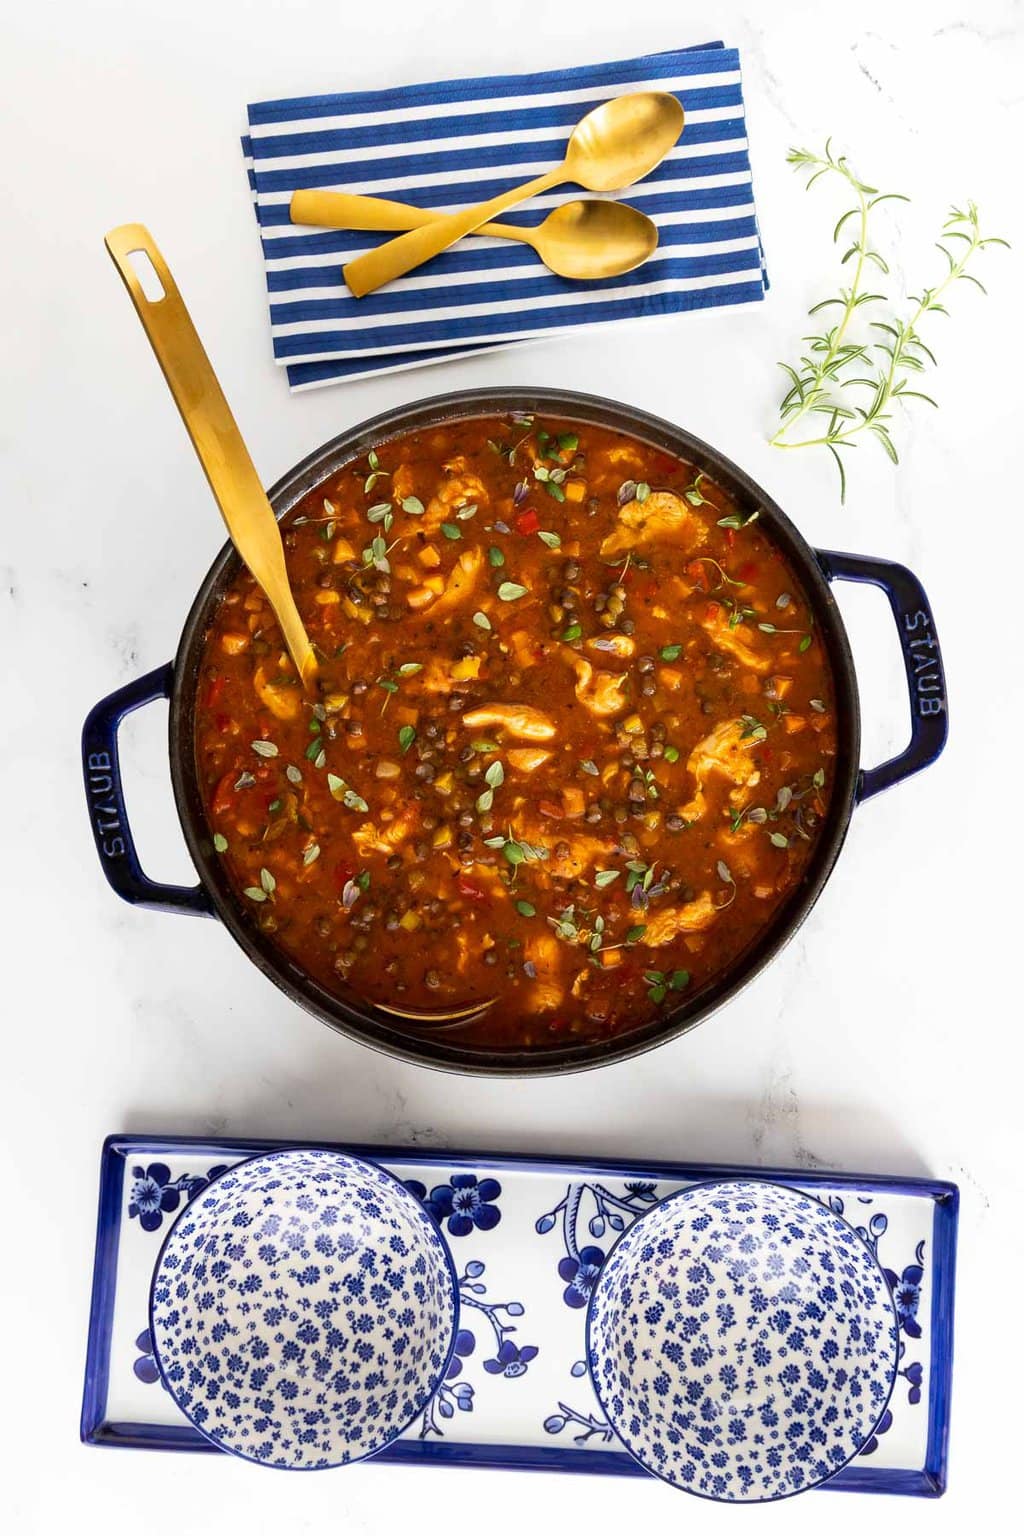 Vertical overhead photo of a cast iron pot of French Lentil Soup on a granite surface.